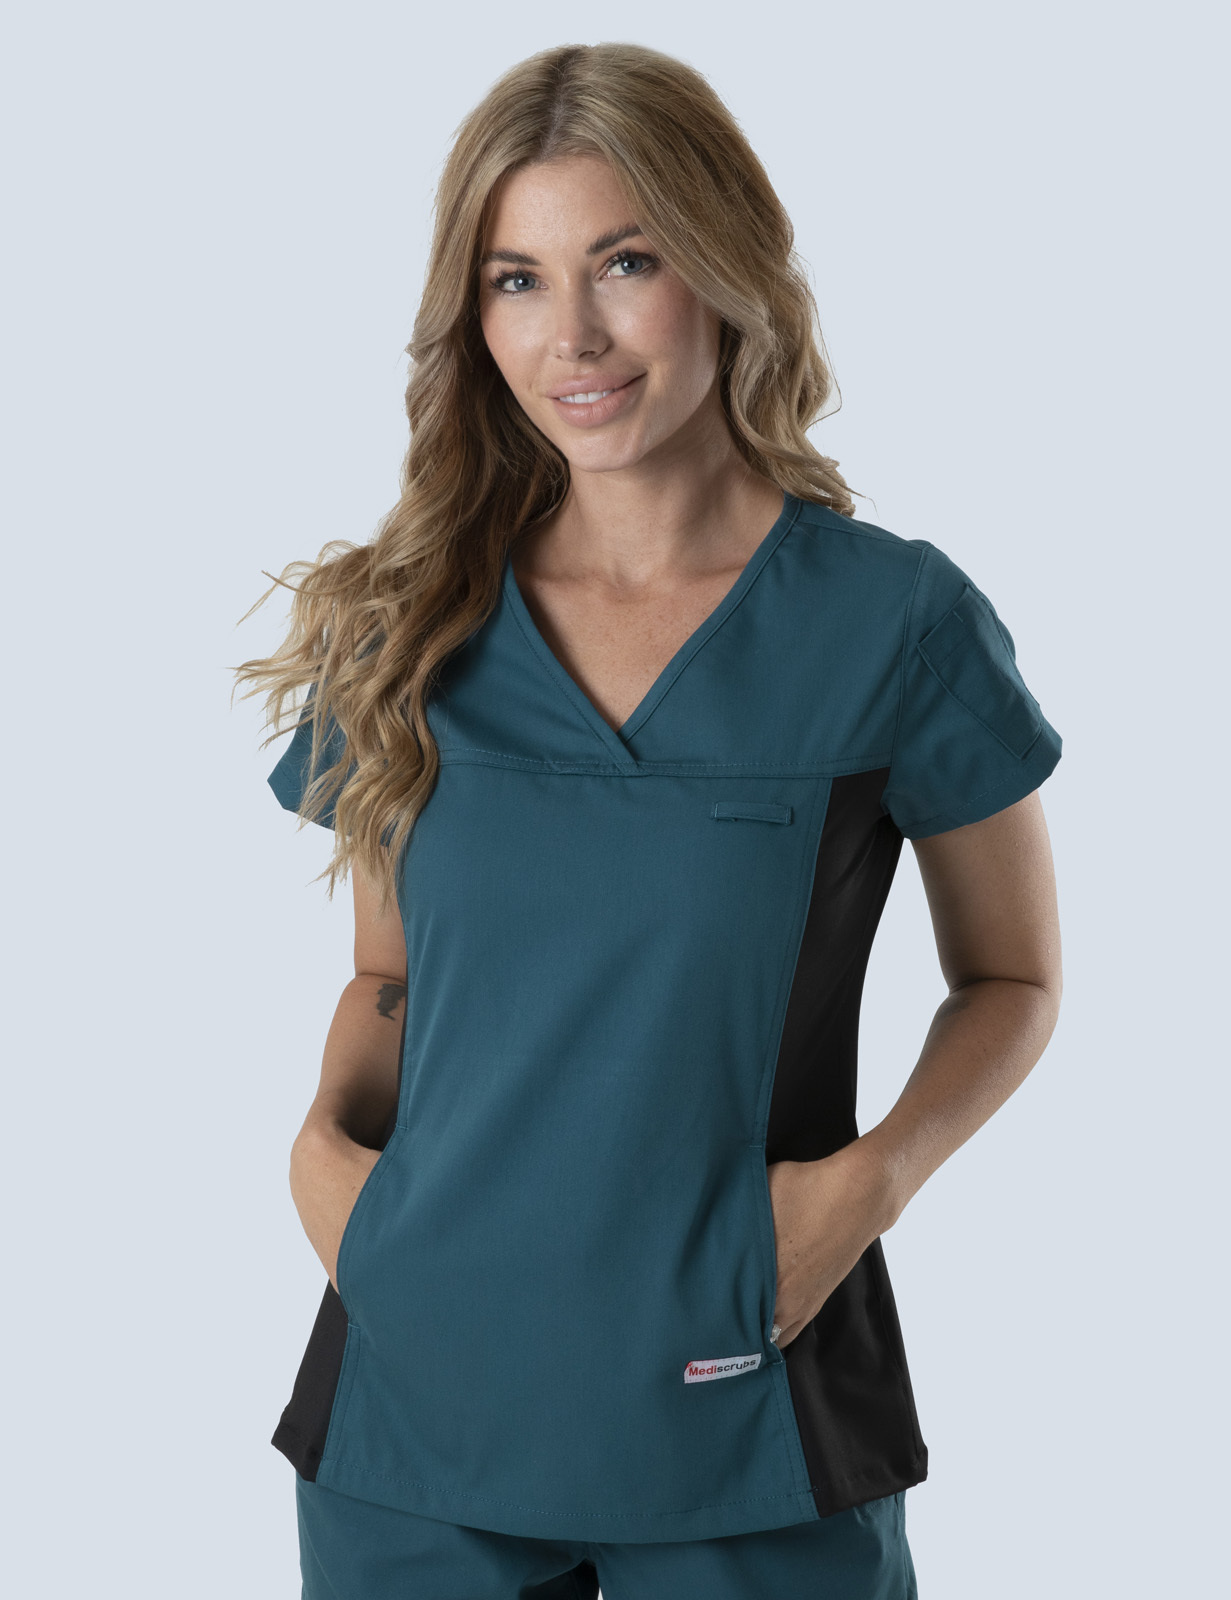 Pathology North - Mid North Coast (Women's Fit Spandex Scrub Top in Caribbean incl Logos)